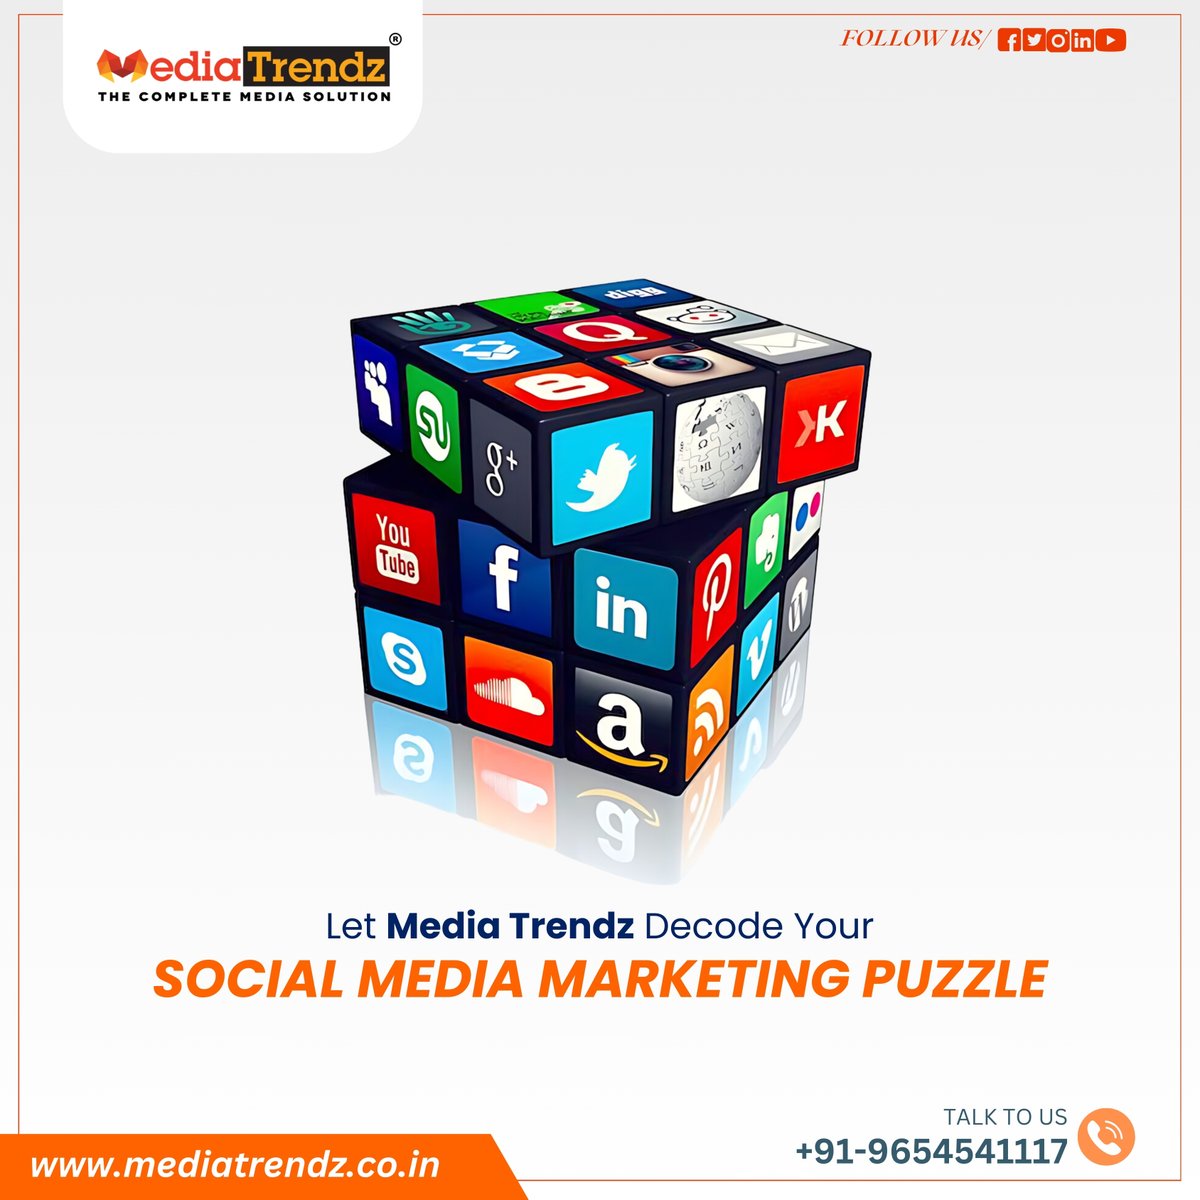 Solve the secrets of social media success with Media Trendz🚀
.
Let us decode your marketing puzzle and turn it into a masterpiece.
#MediaTrendz #DigitalMarketing #SocialMediaMarketing #DigitalStrategy #ContentCreation #OnlinePresence #MarketingExperts #SocialMediaIcons